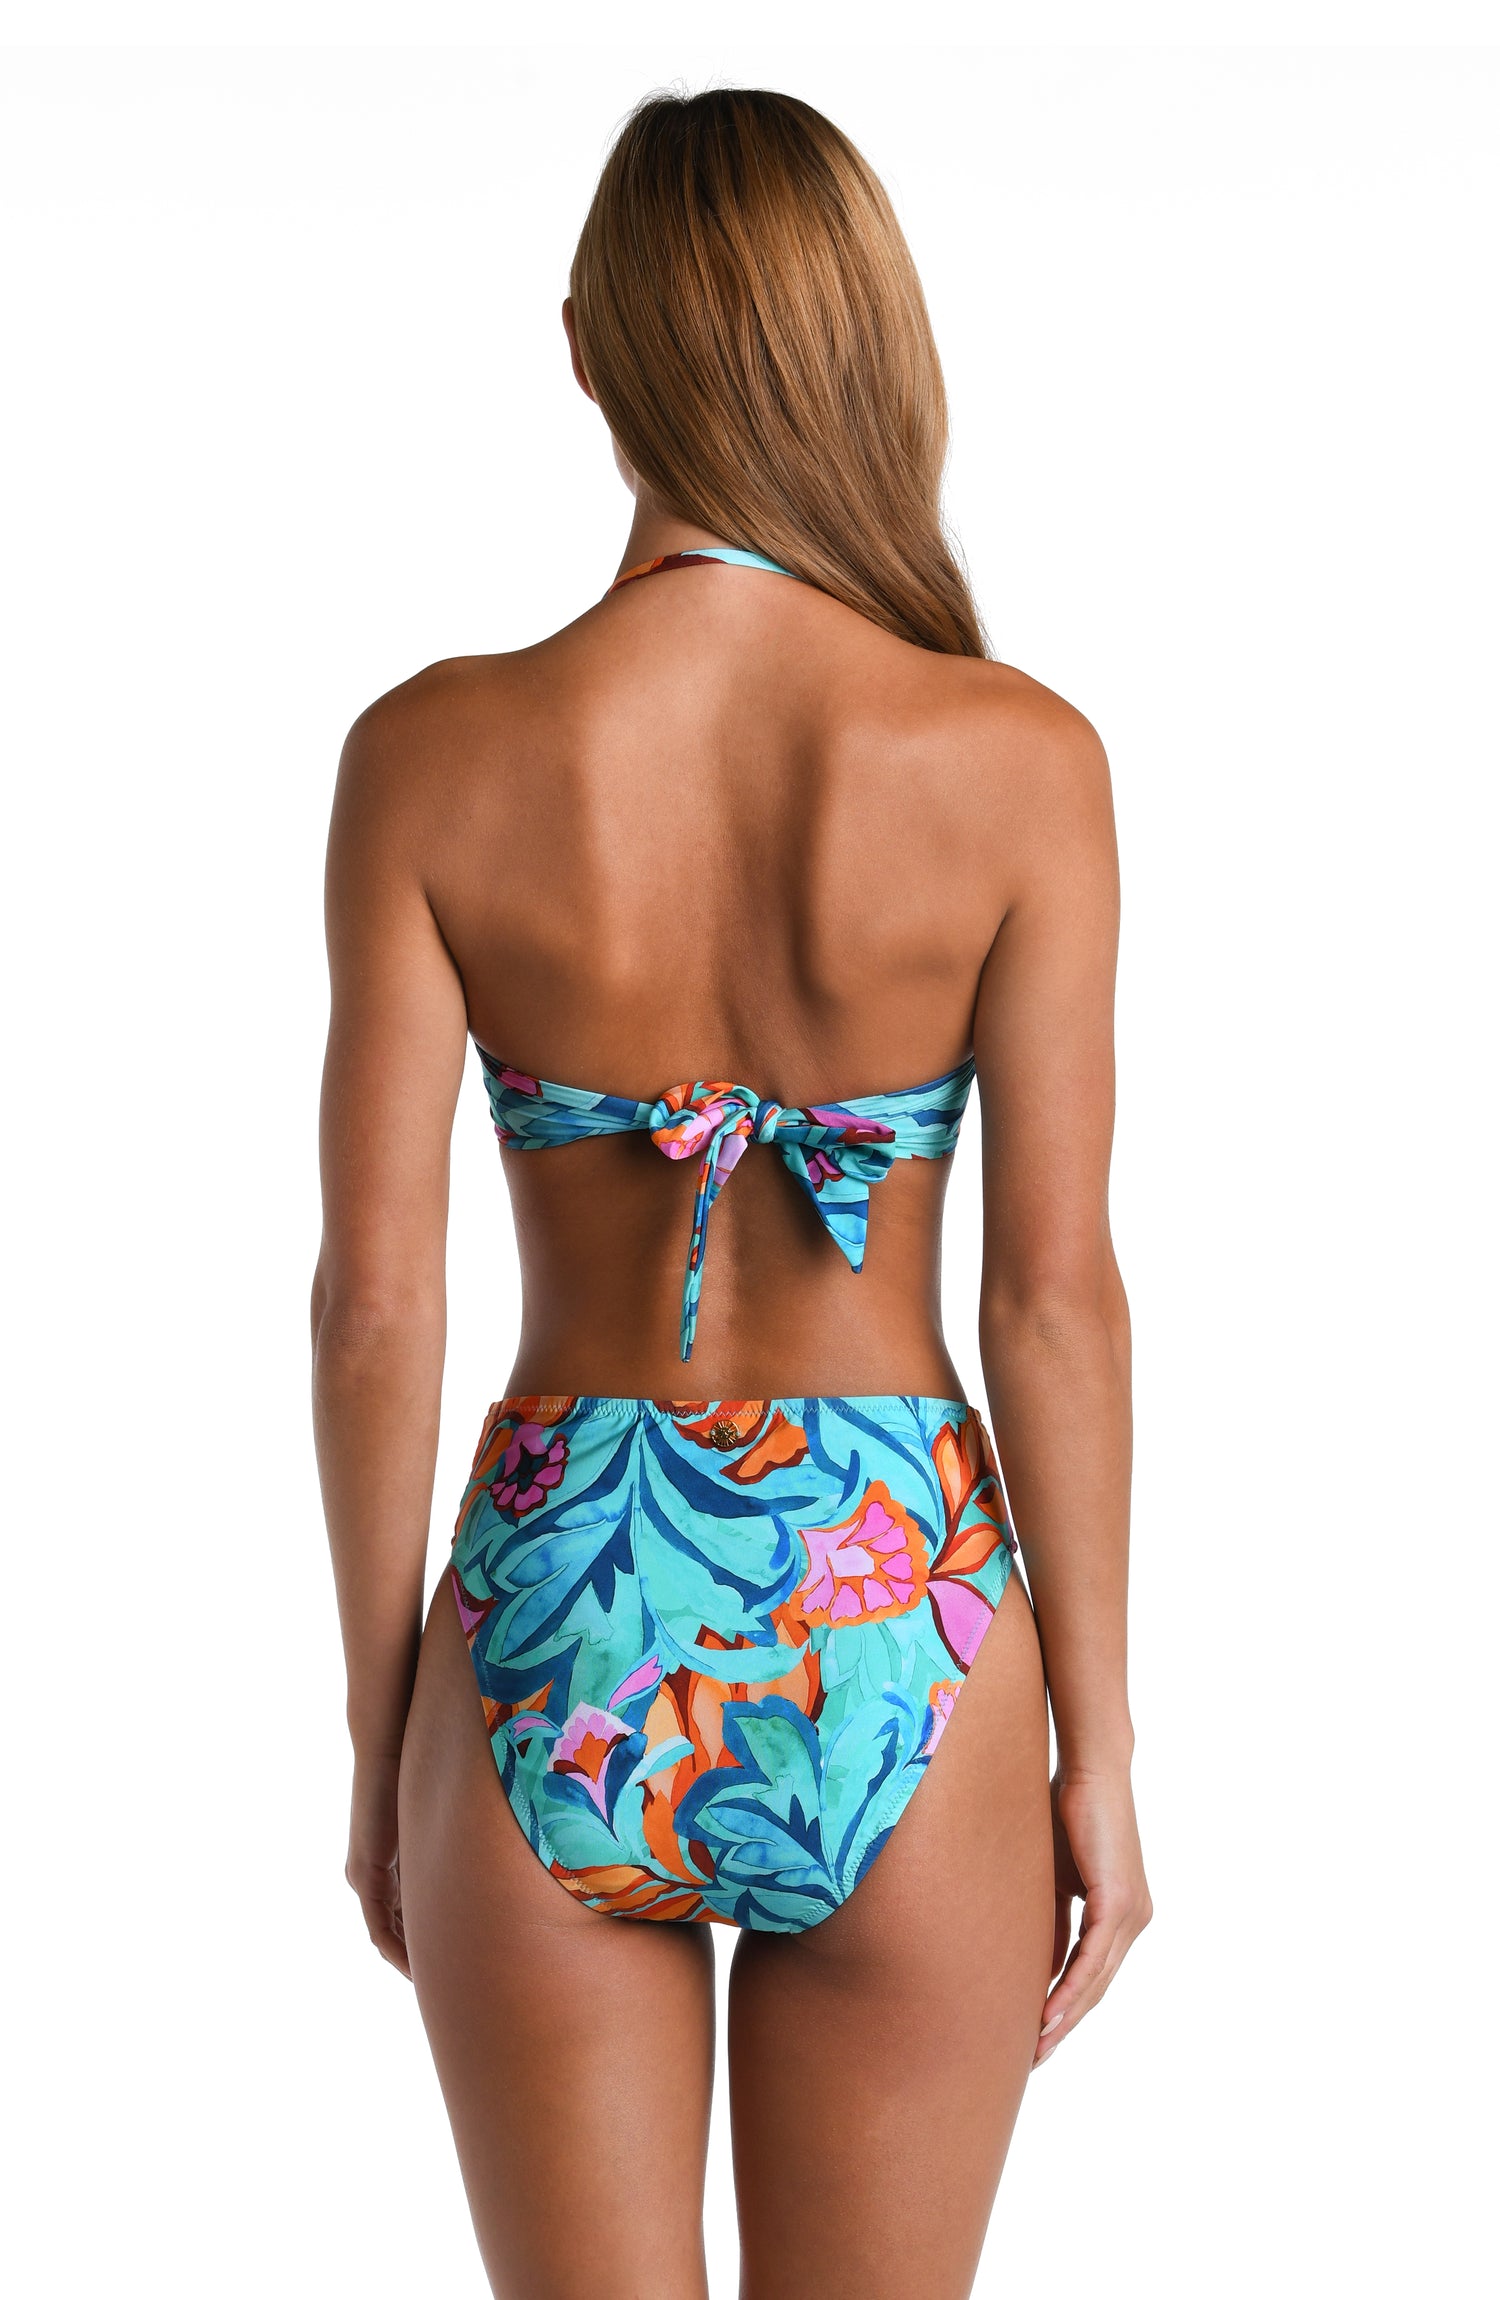 Model is wearing a turquoise, blue, coral multicolored floral printed Bandeau Bikini Top